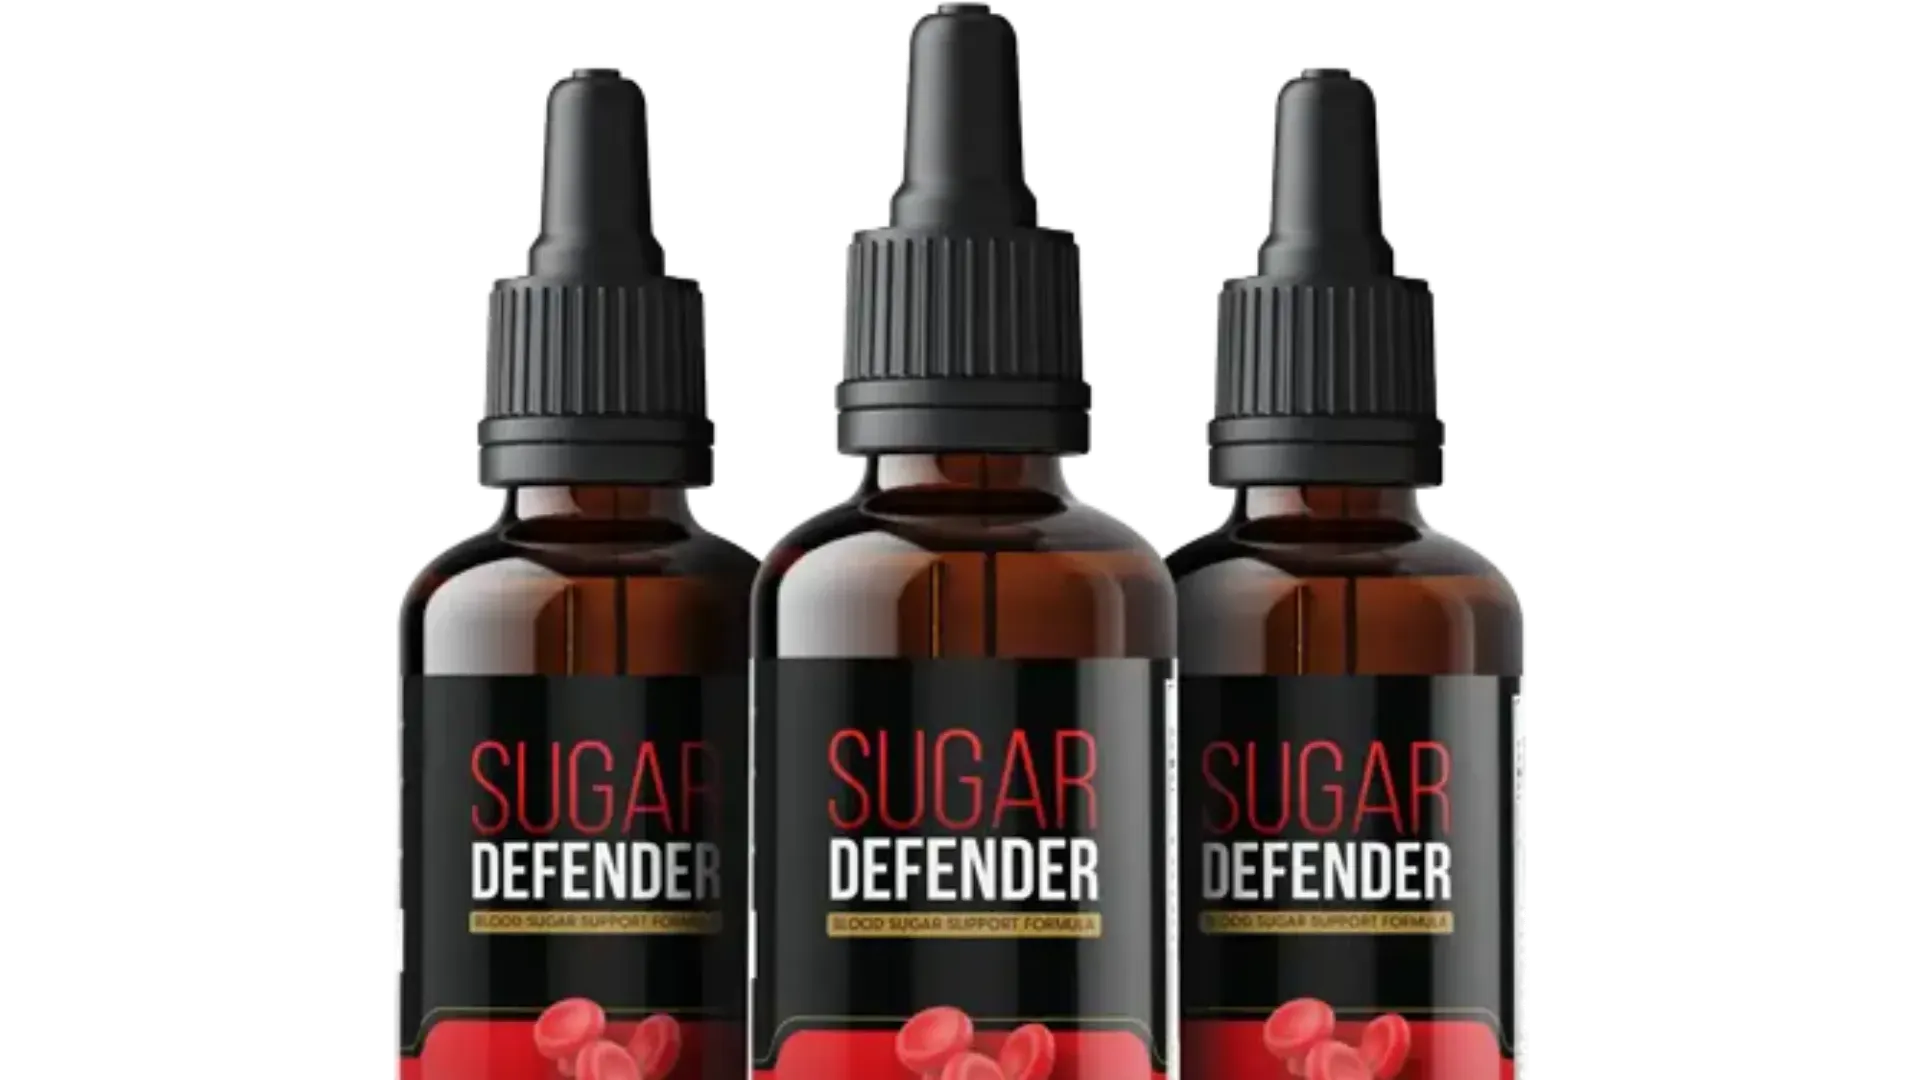 Opening Well-Being: The Scientific Basis of Sugar Defender's Achievements